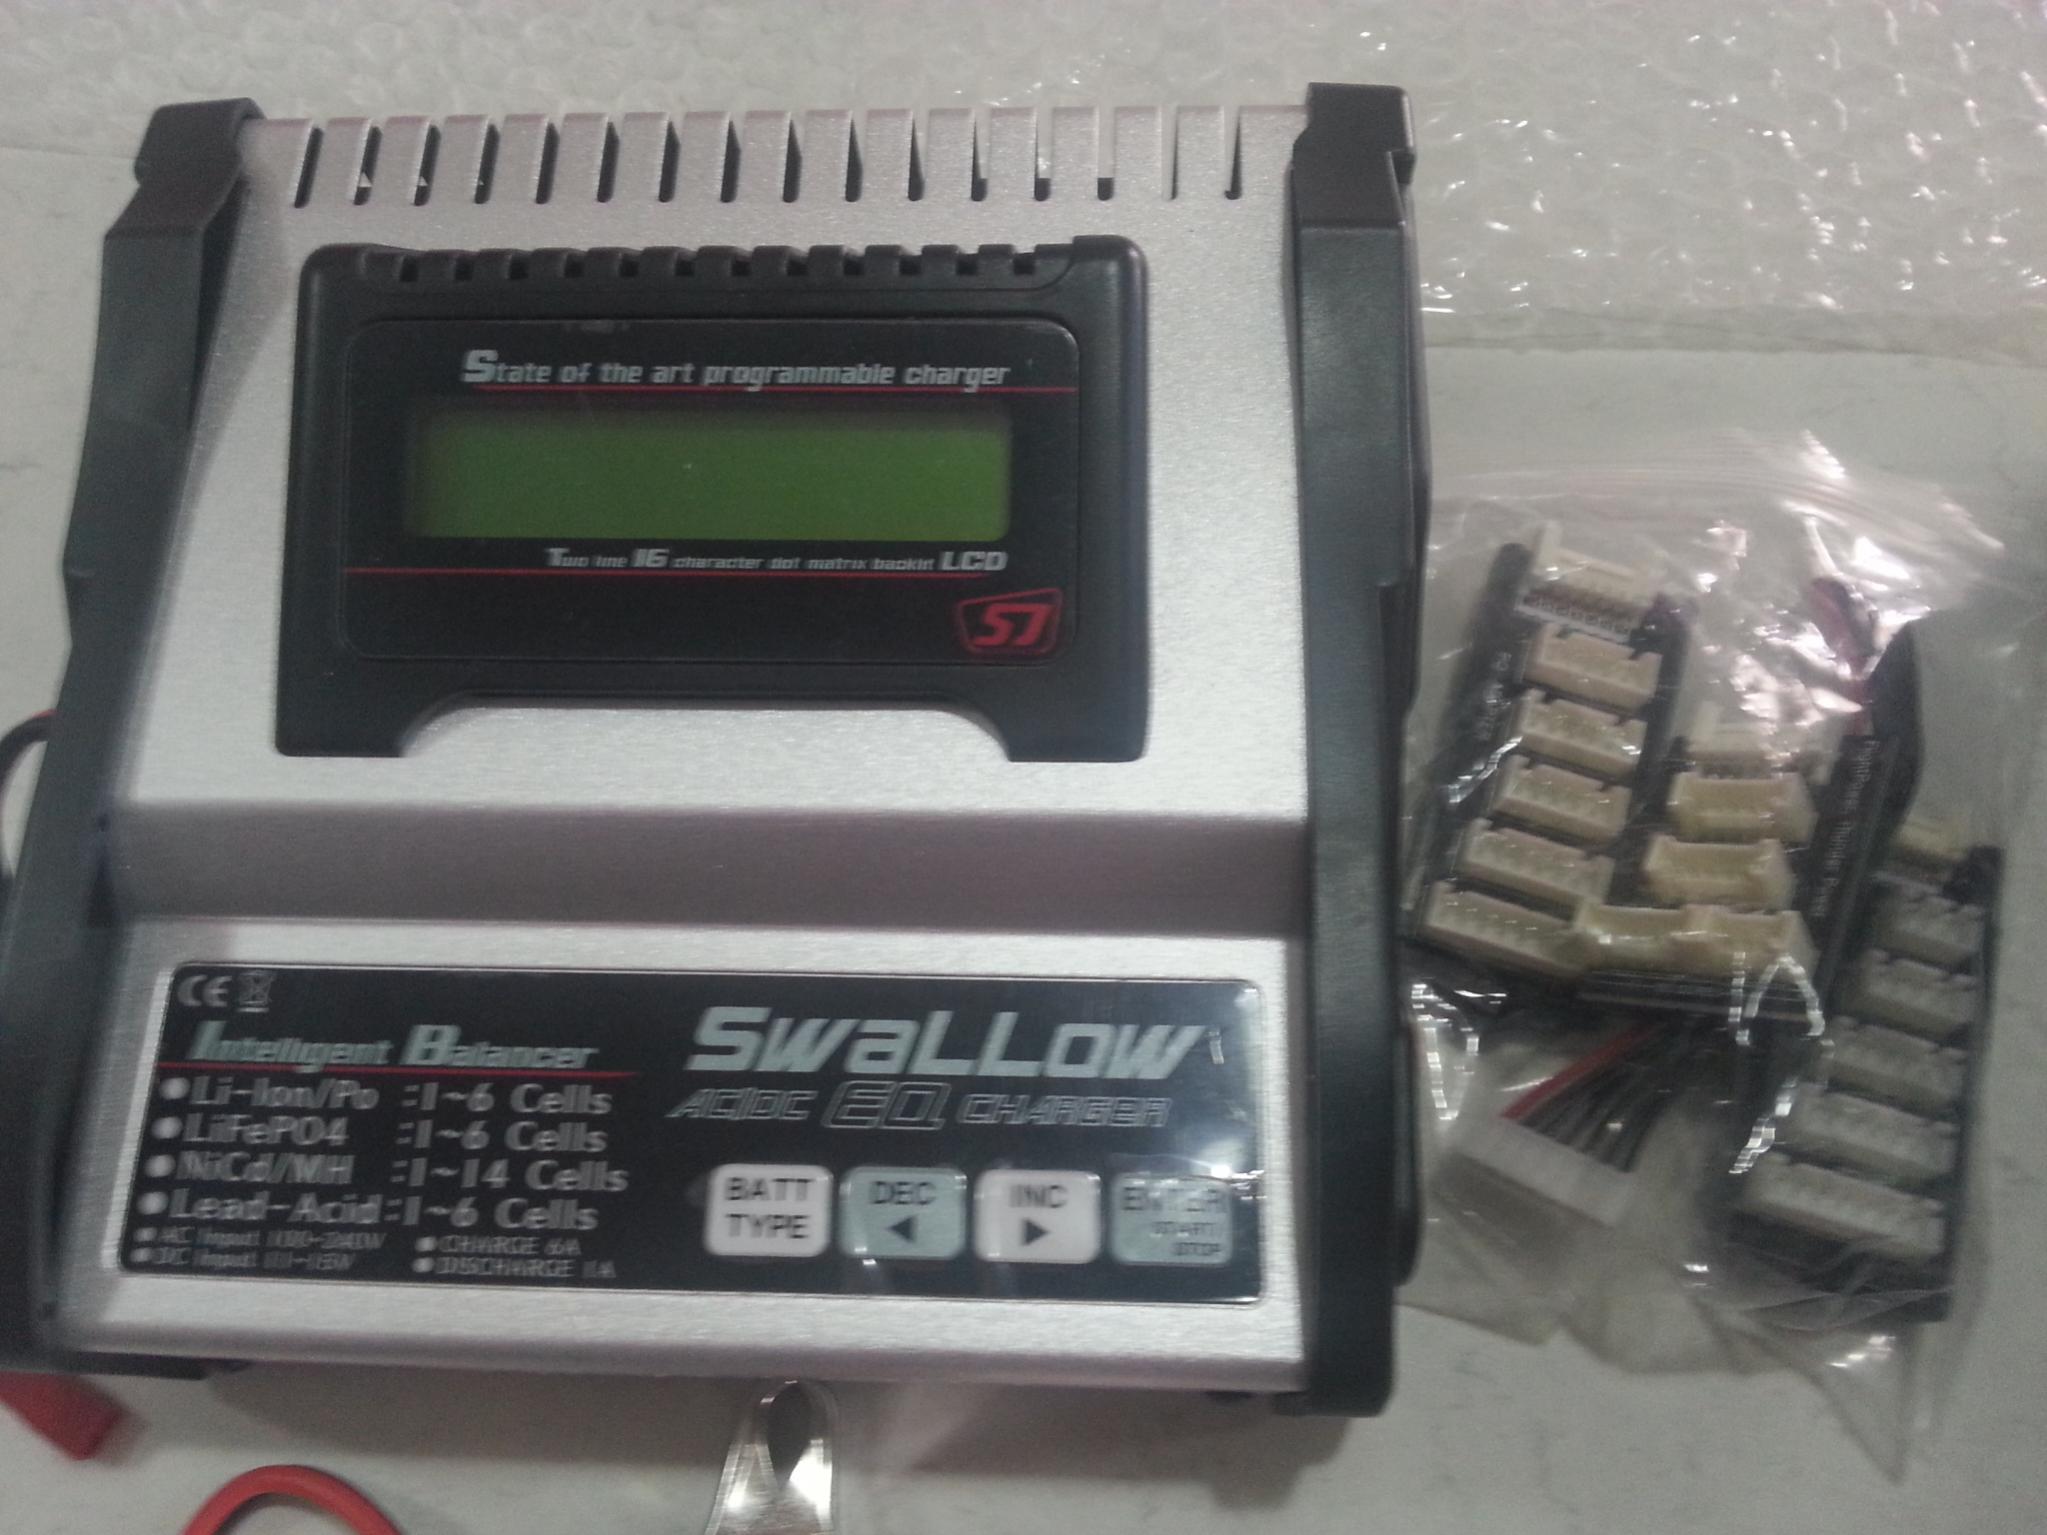 swallow EQ ac/dc charger - R/C Tech Forums